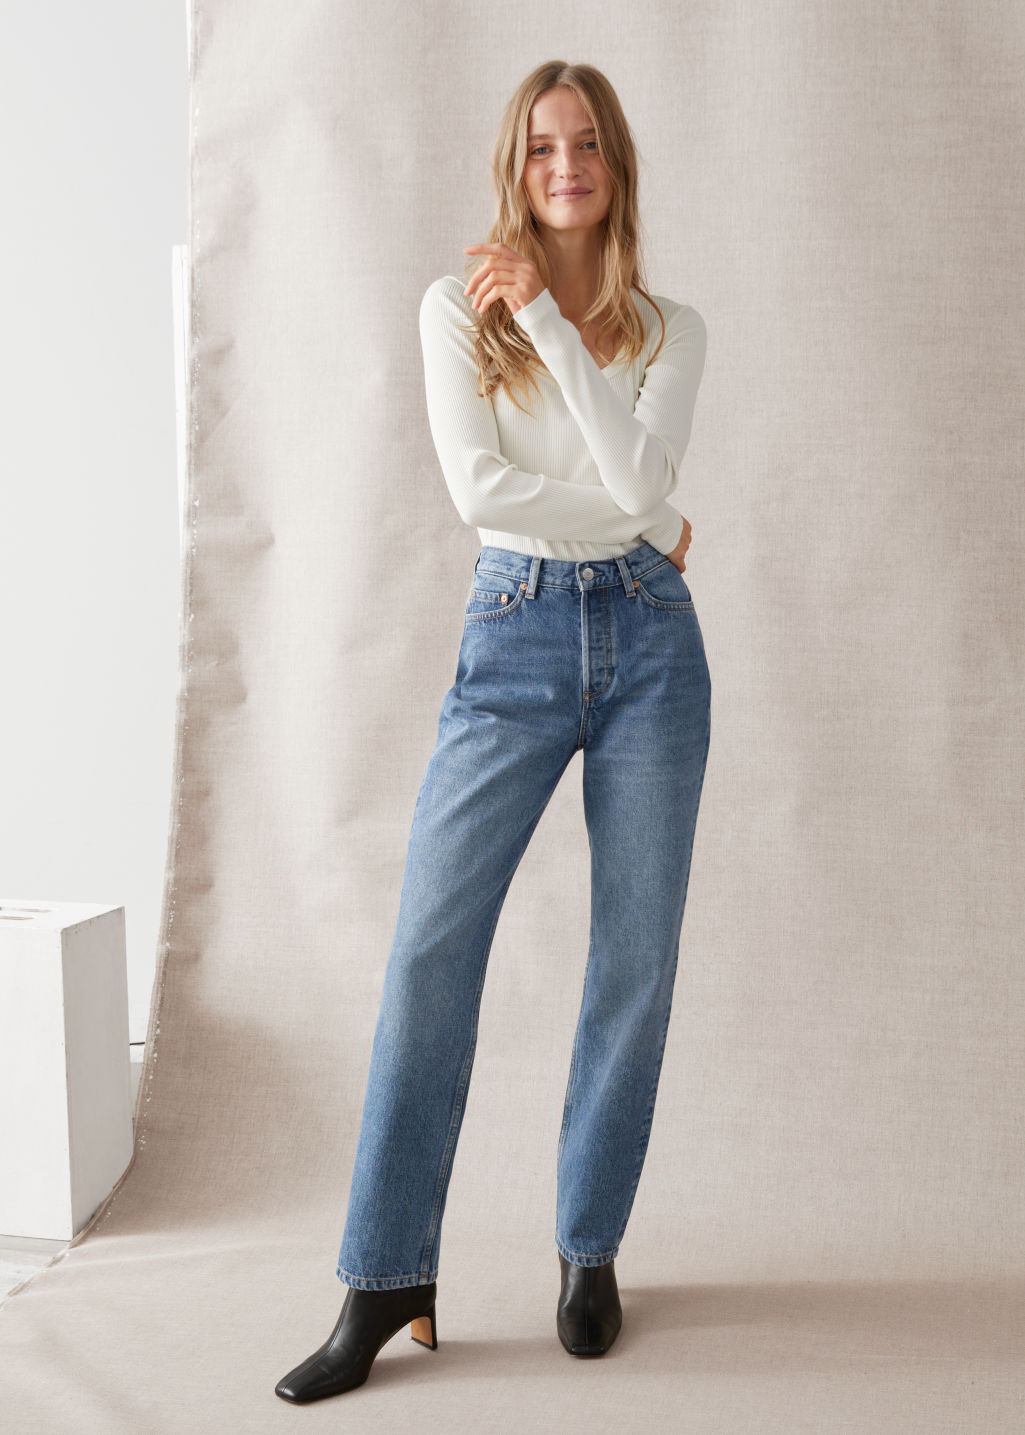 Keeper Cut Jeans - Light Blue - Jeans - & Other Stories - Click Image to Close